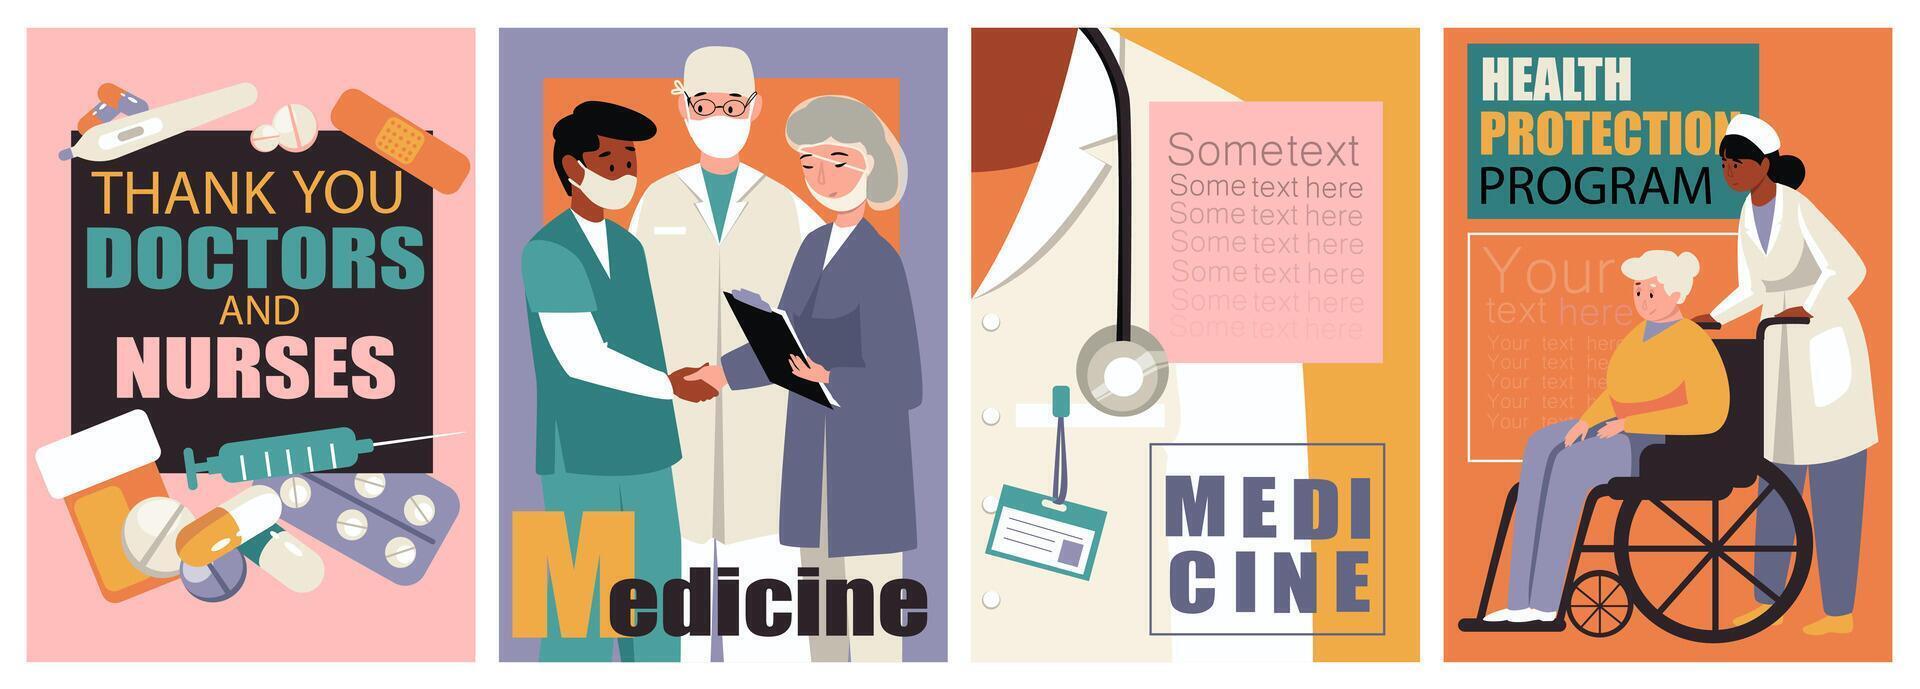 Medical service cover brochure set in trendy flat design. Poster templates with medicine and clinic stuff, thanks for doctors and nurses, handicapped patients care and therapy. Vector illustration.